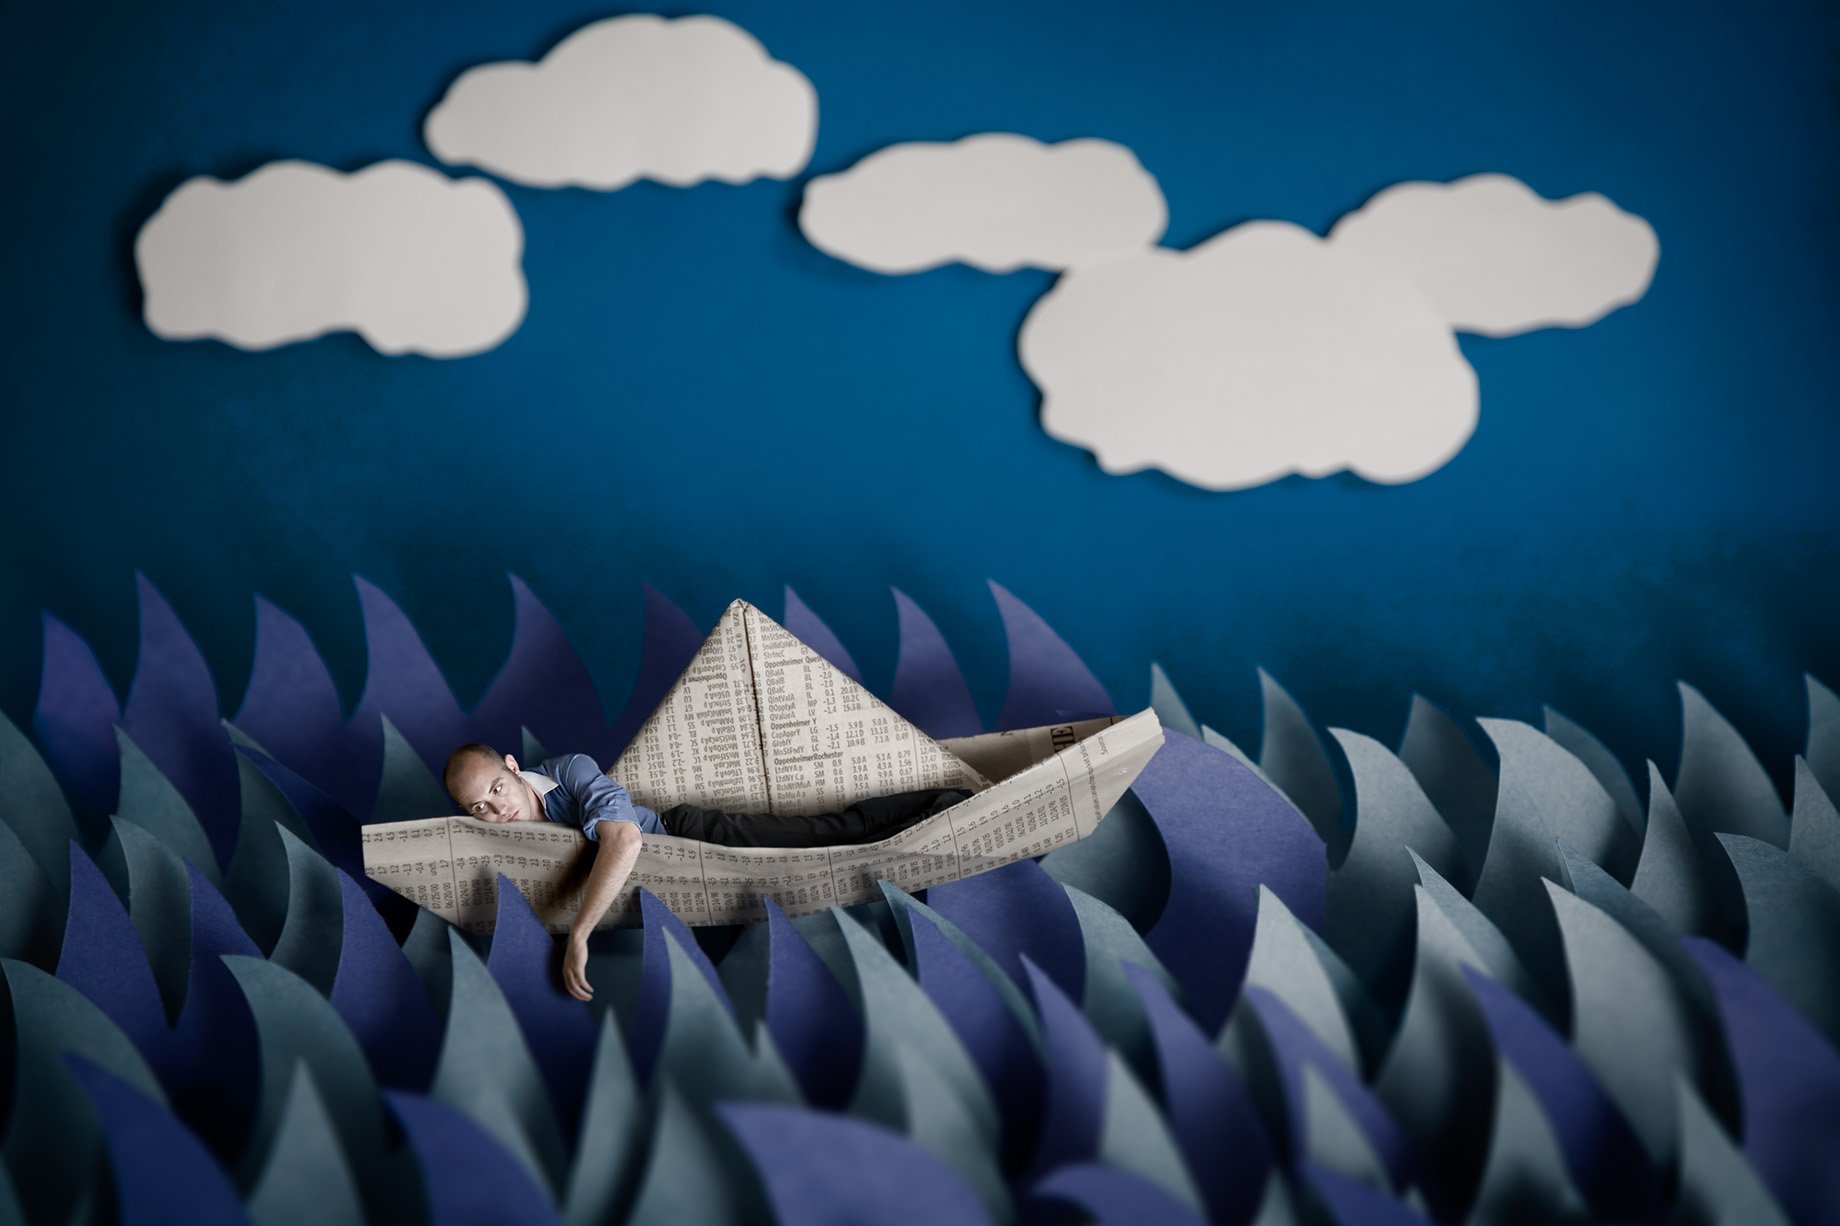 Man sits in newspaper boat made from construction paper shot by Patrick Heageny for Paper Thin